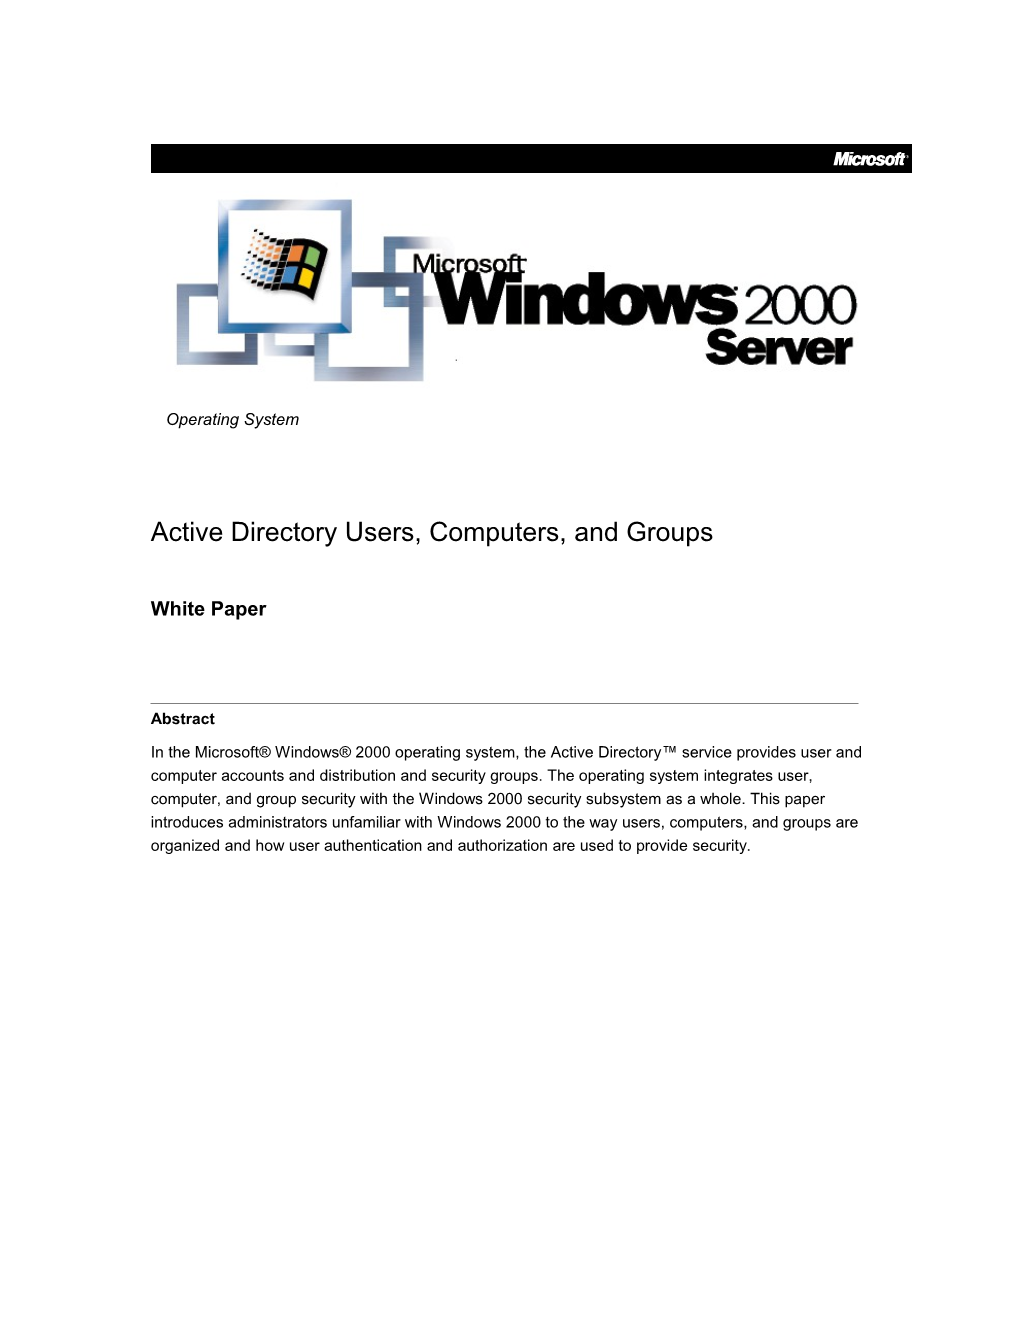 Active Directory Users, Computers, and Groups